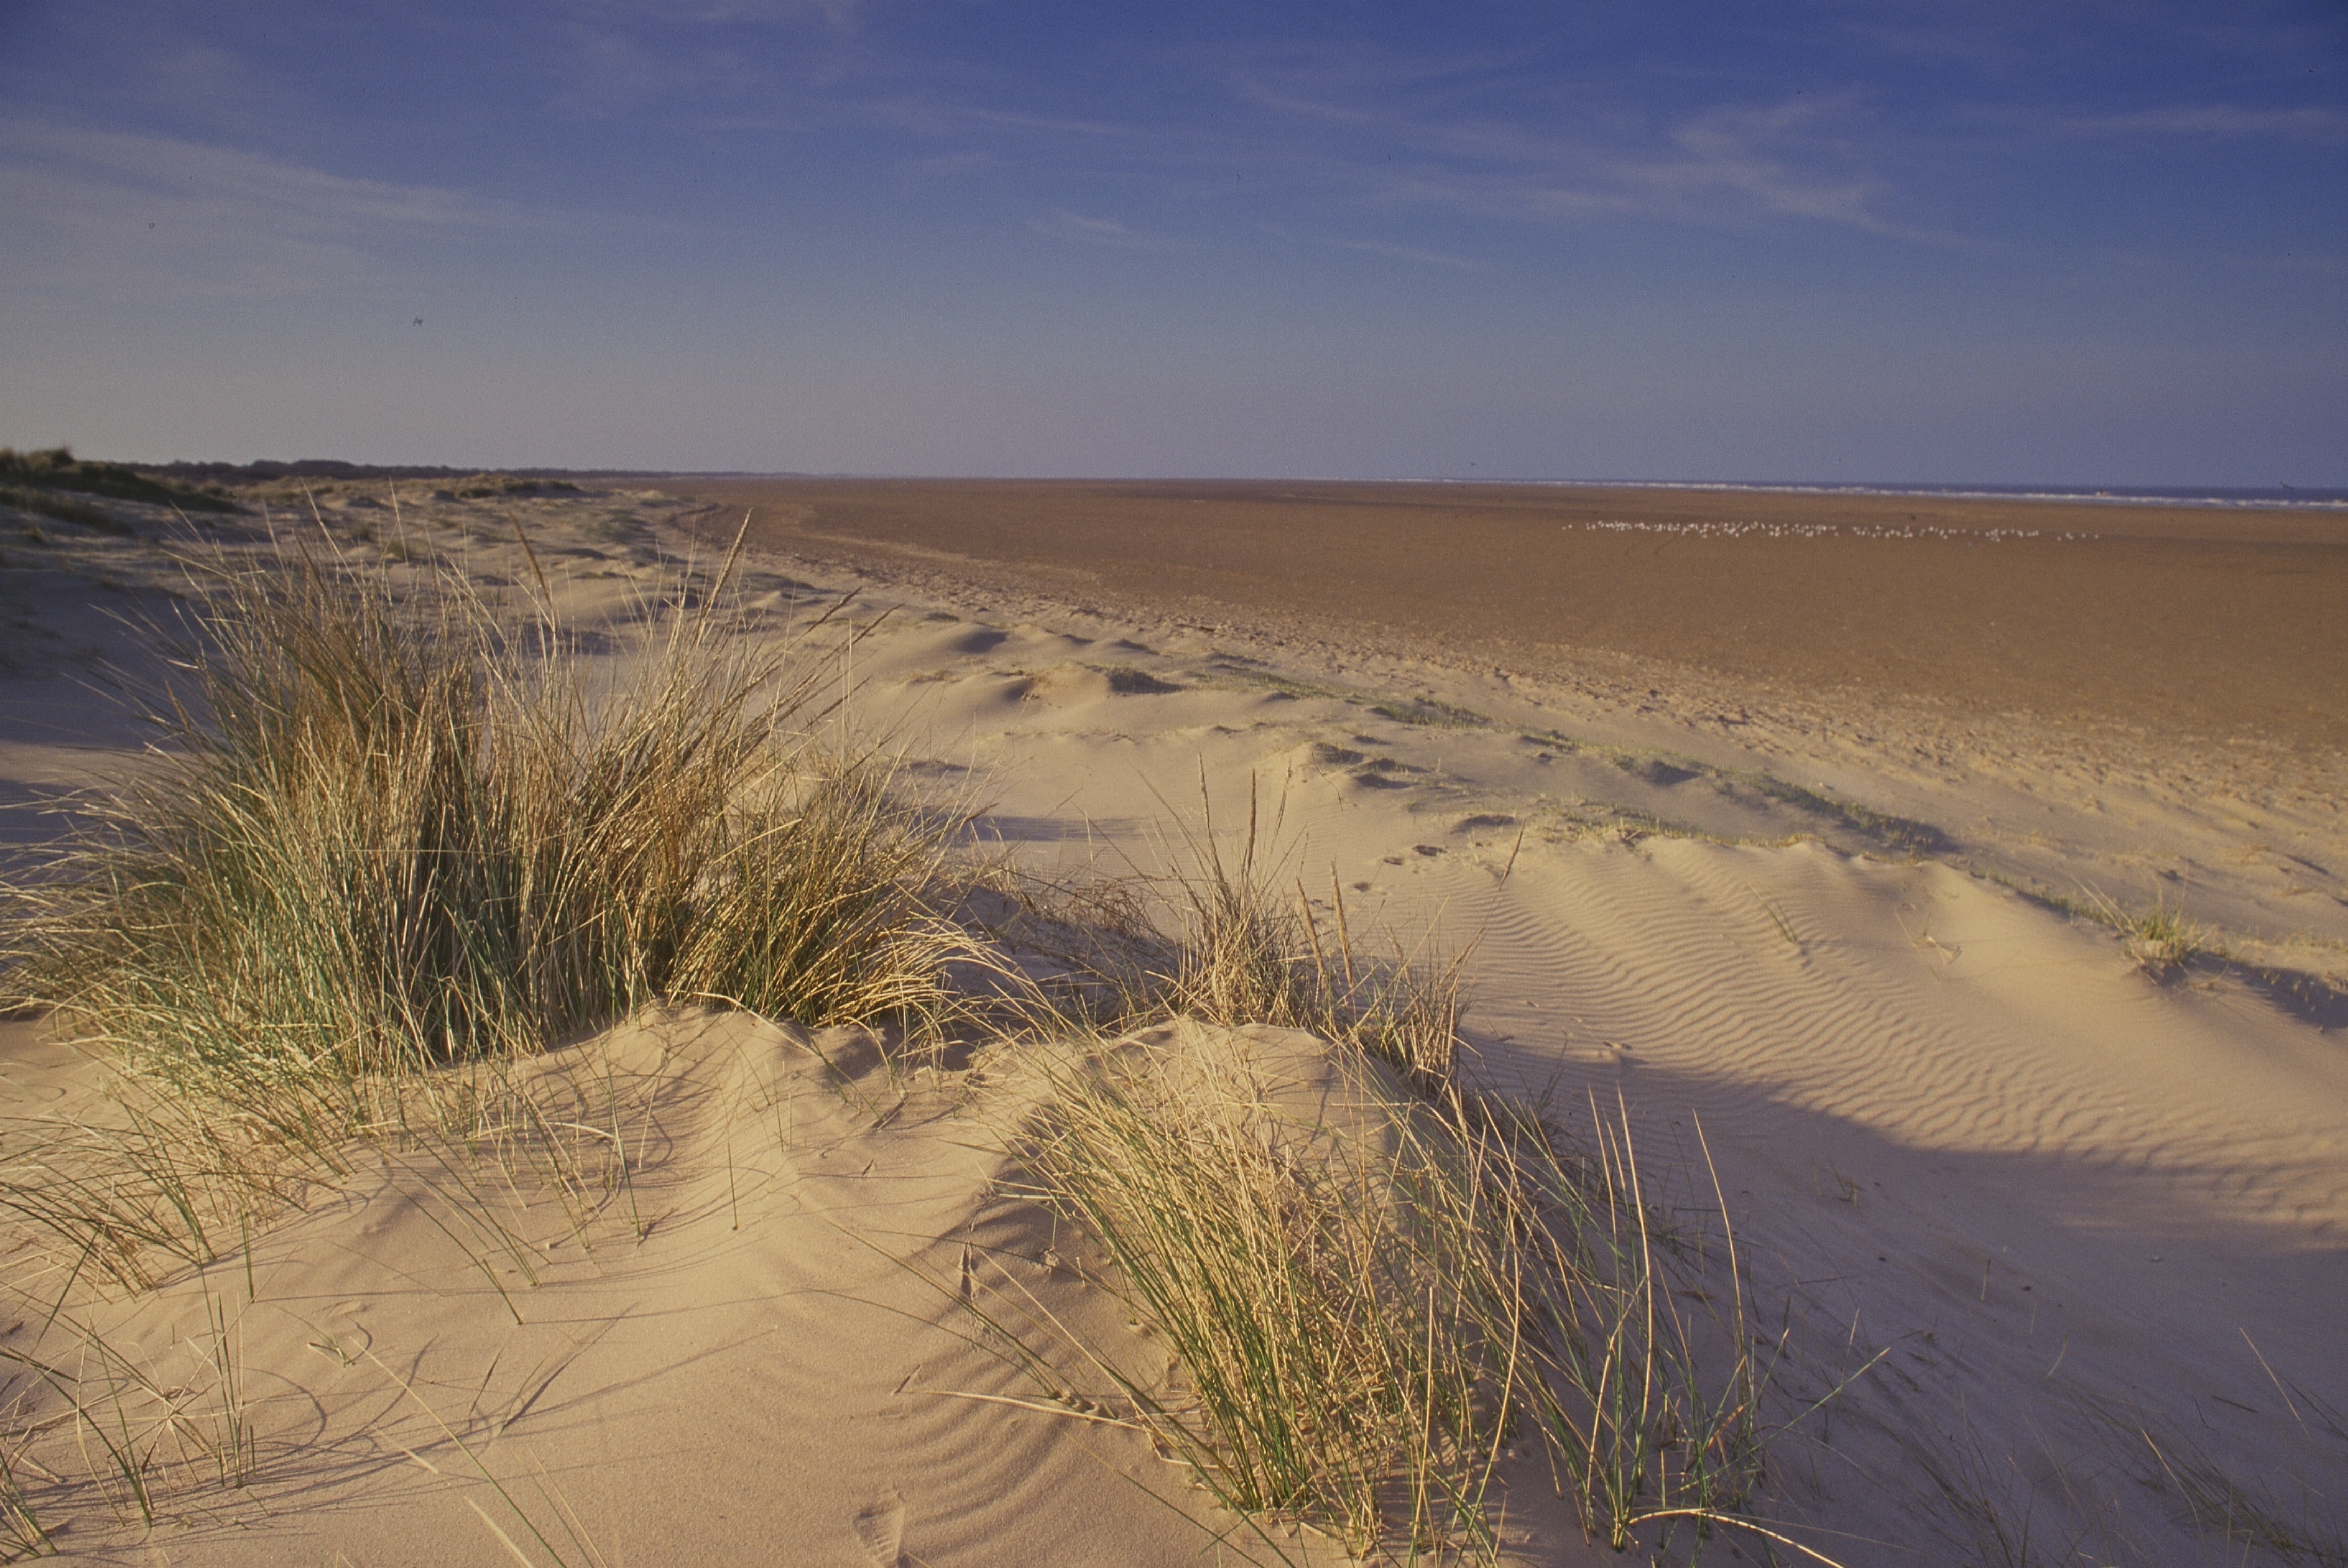 Saltfleetby Theddlesthope Dunes in Lincolnshire